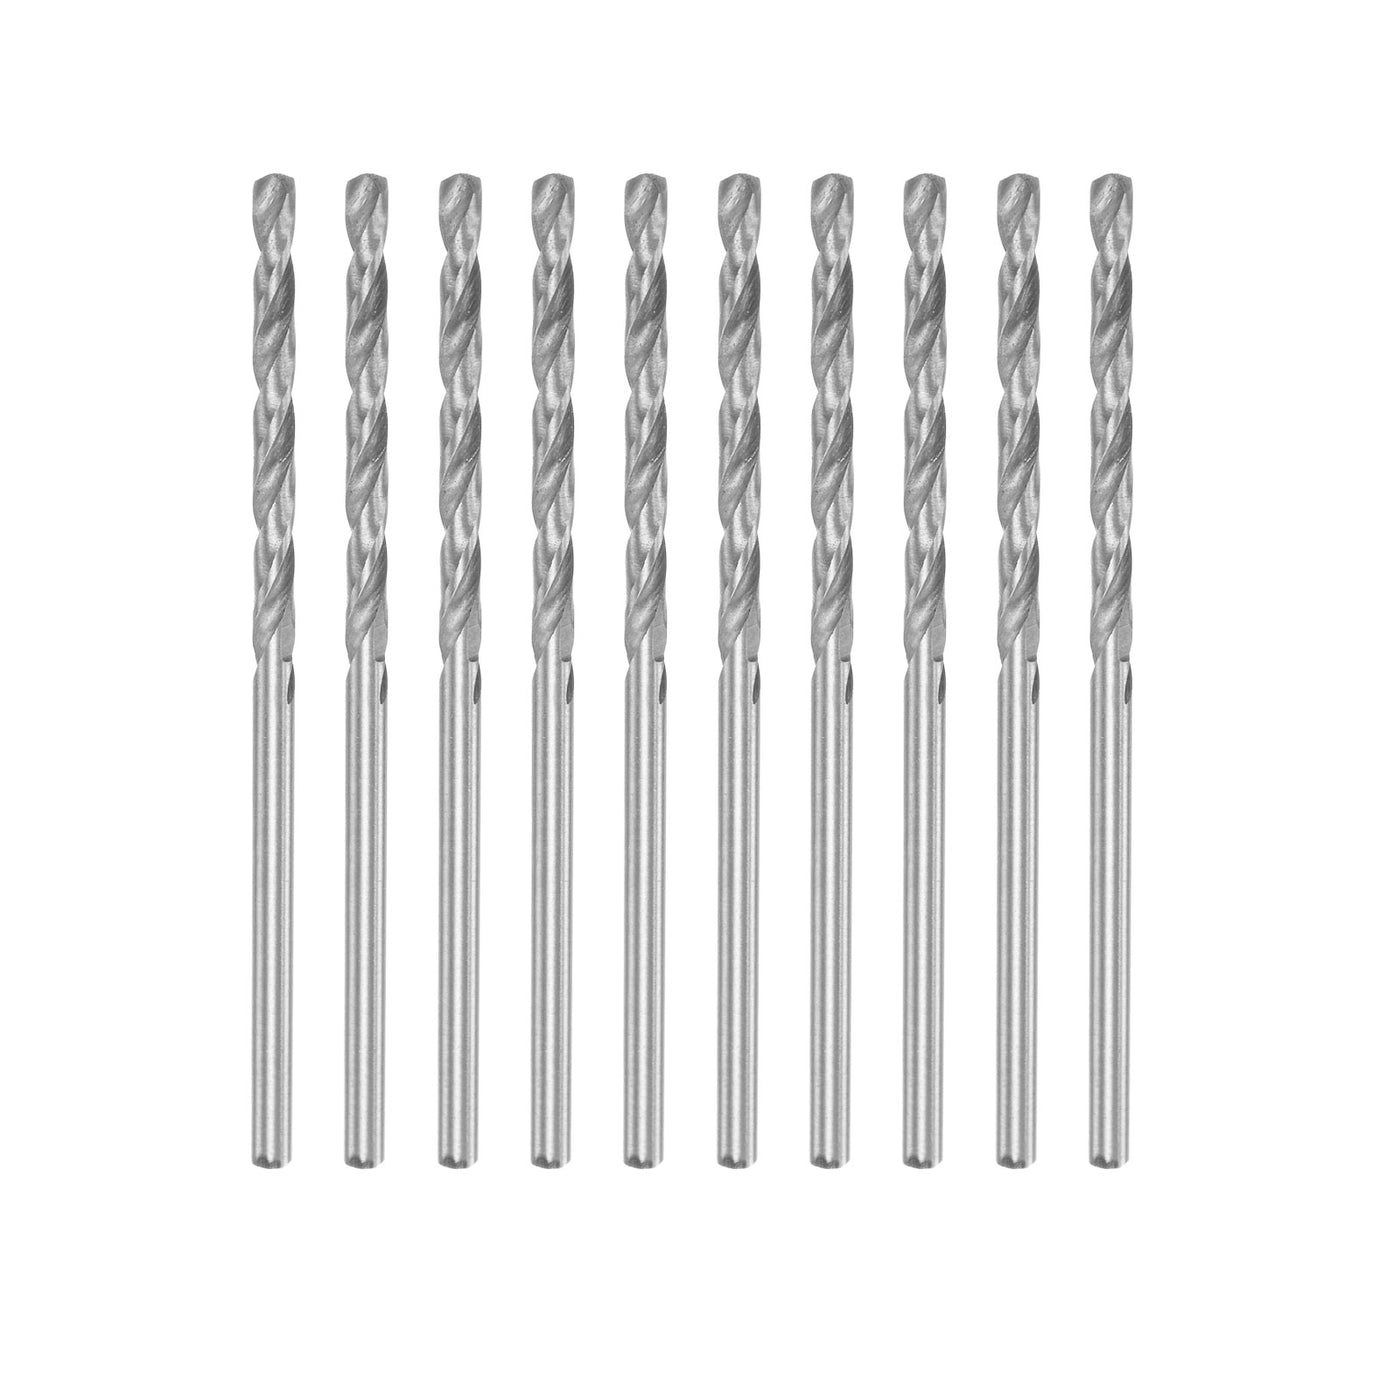 uxcell Uxcell 10 Pcs 2.35mm High Speed Steel Drill Bits, Fully Ground 56mm Length Drill Bit